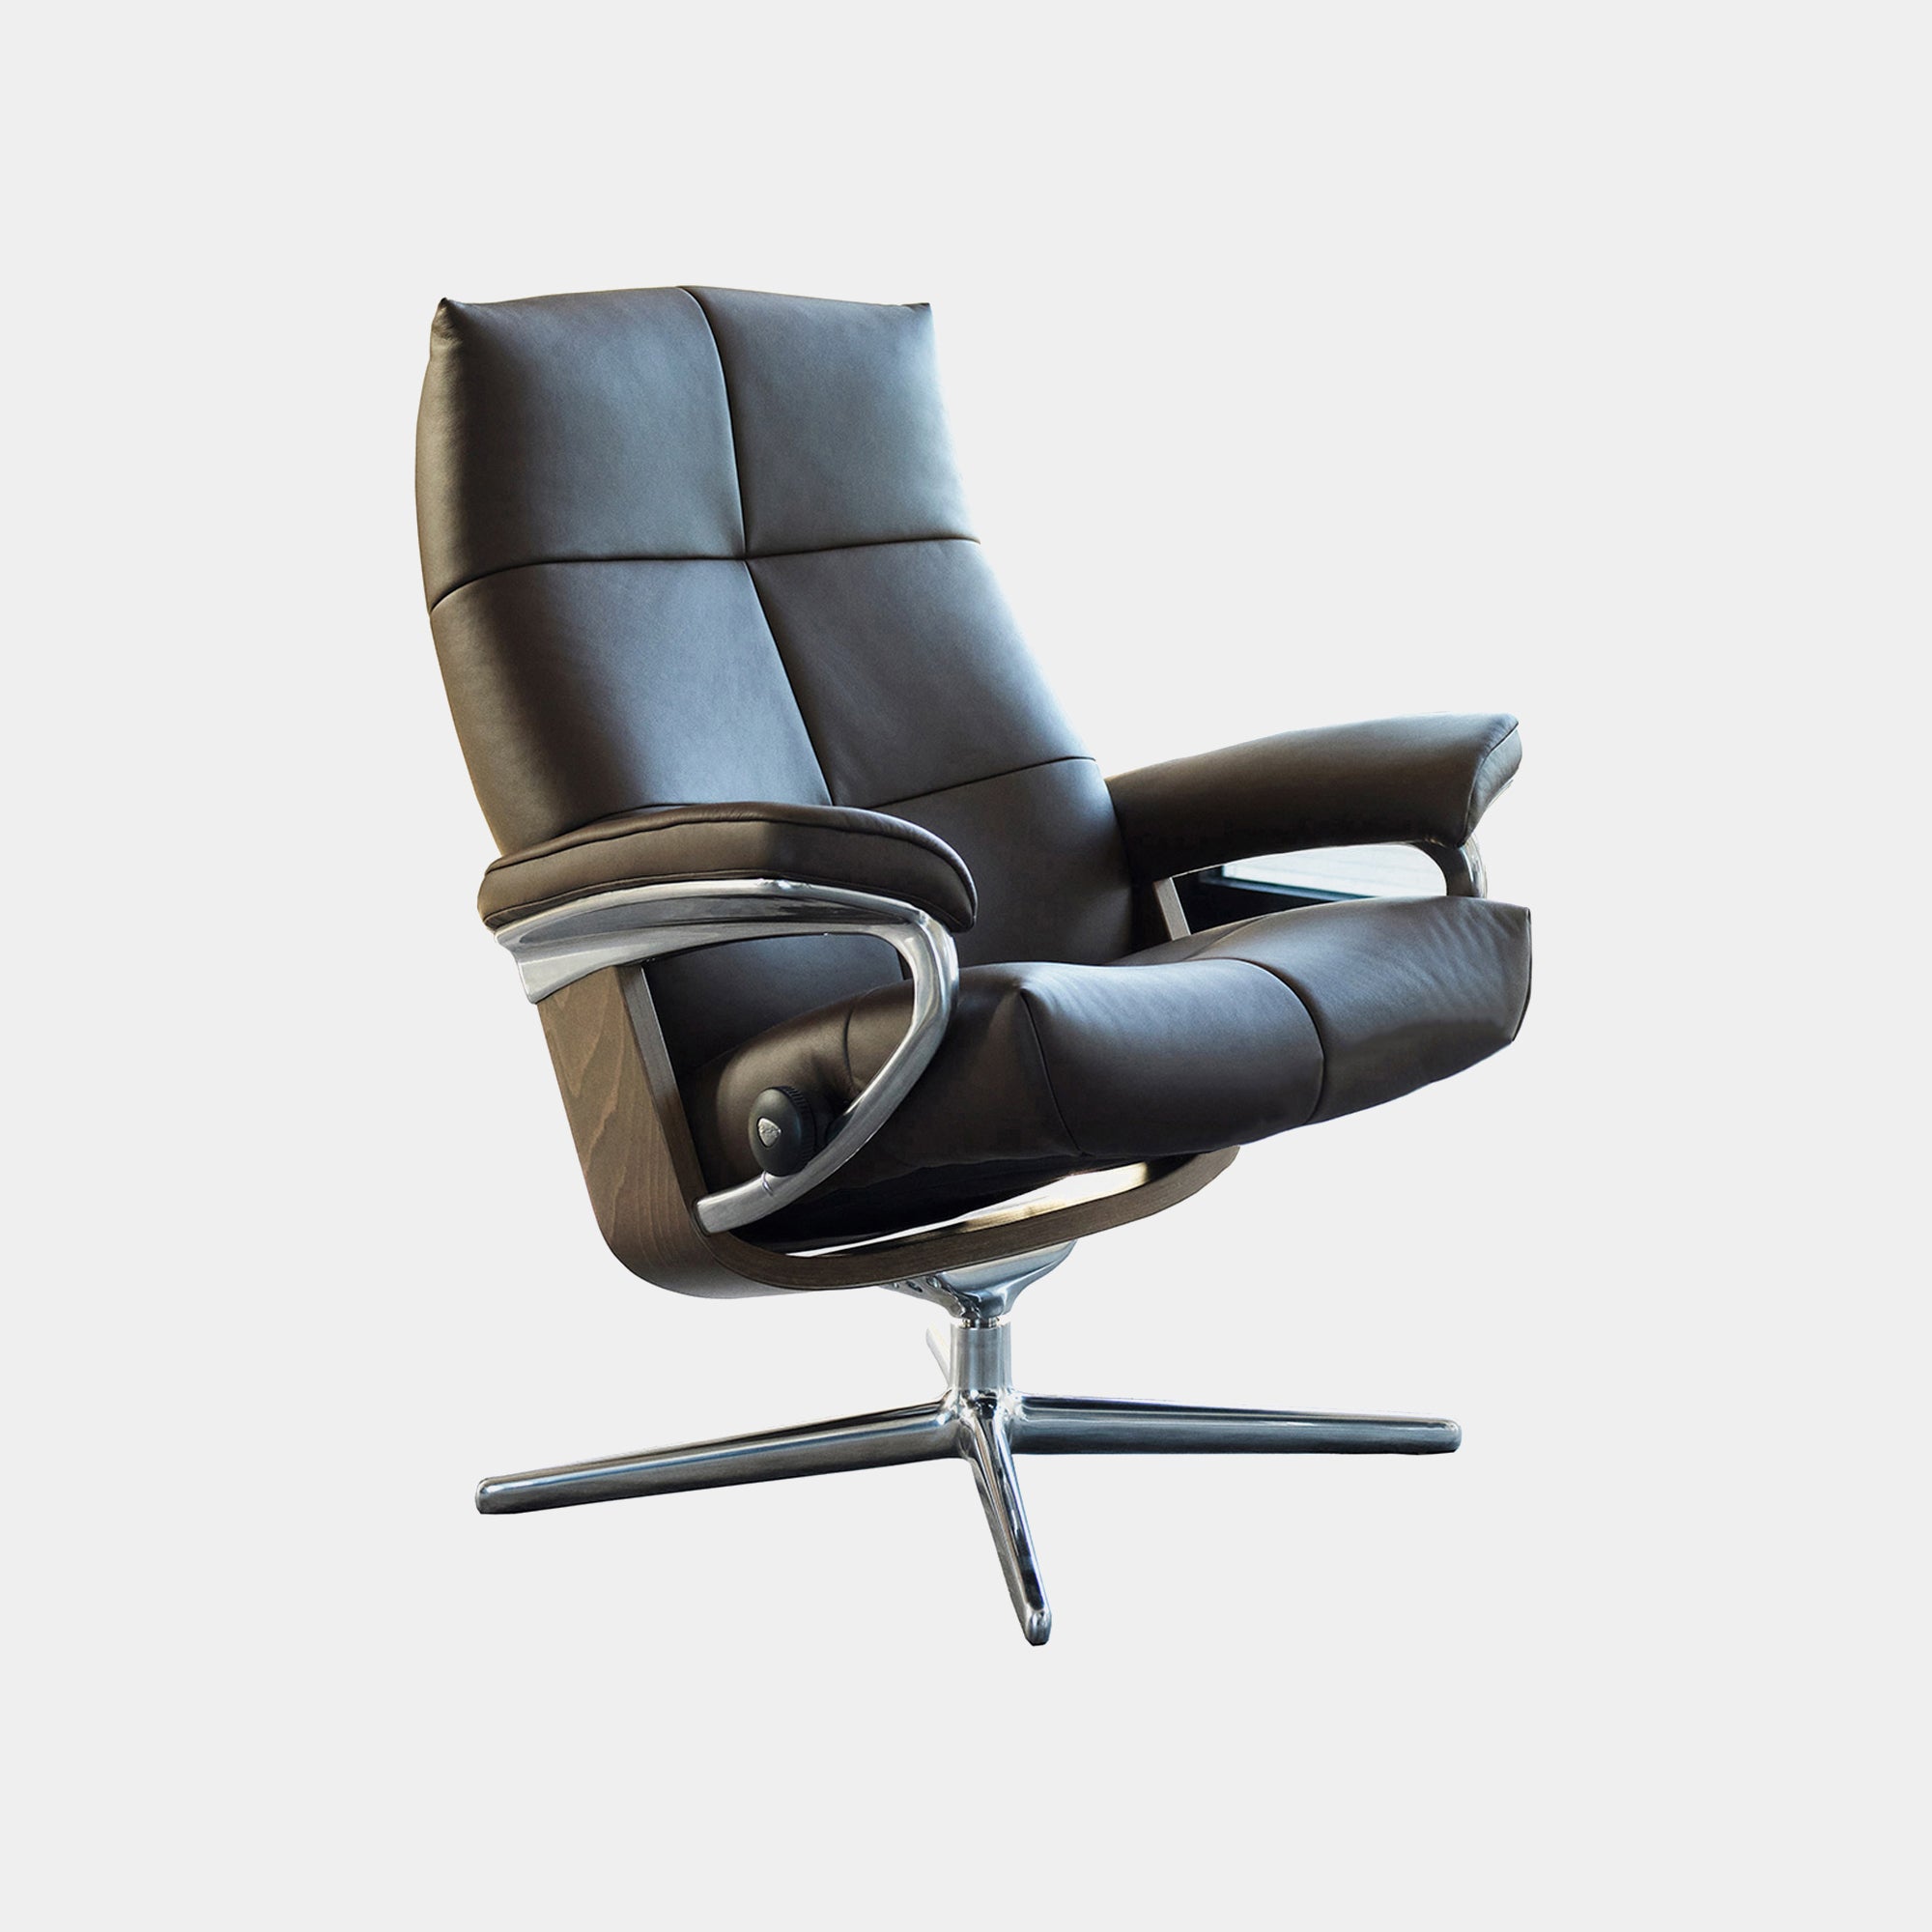 Medium Chair With Cross Base In Leather Batick